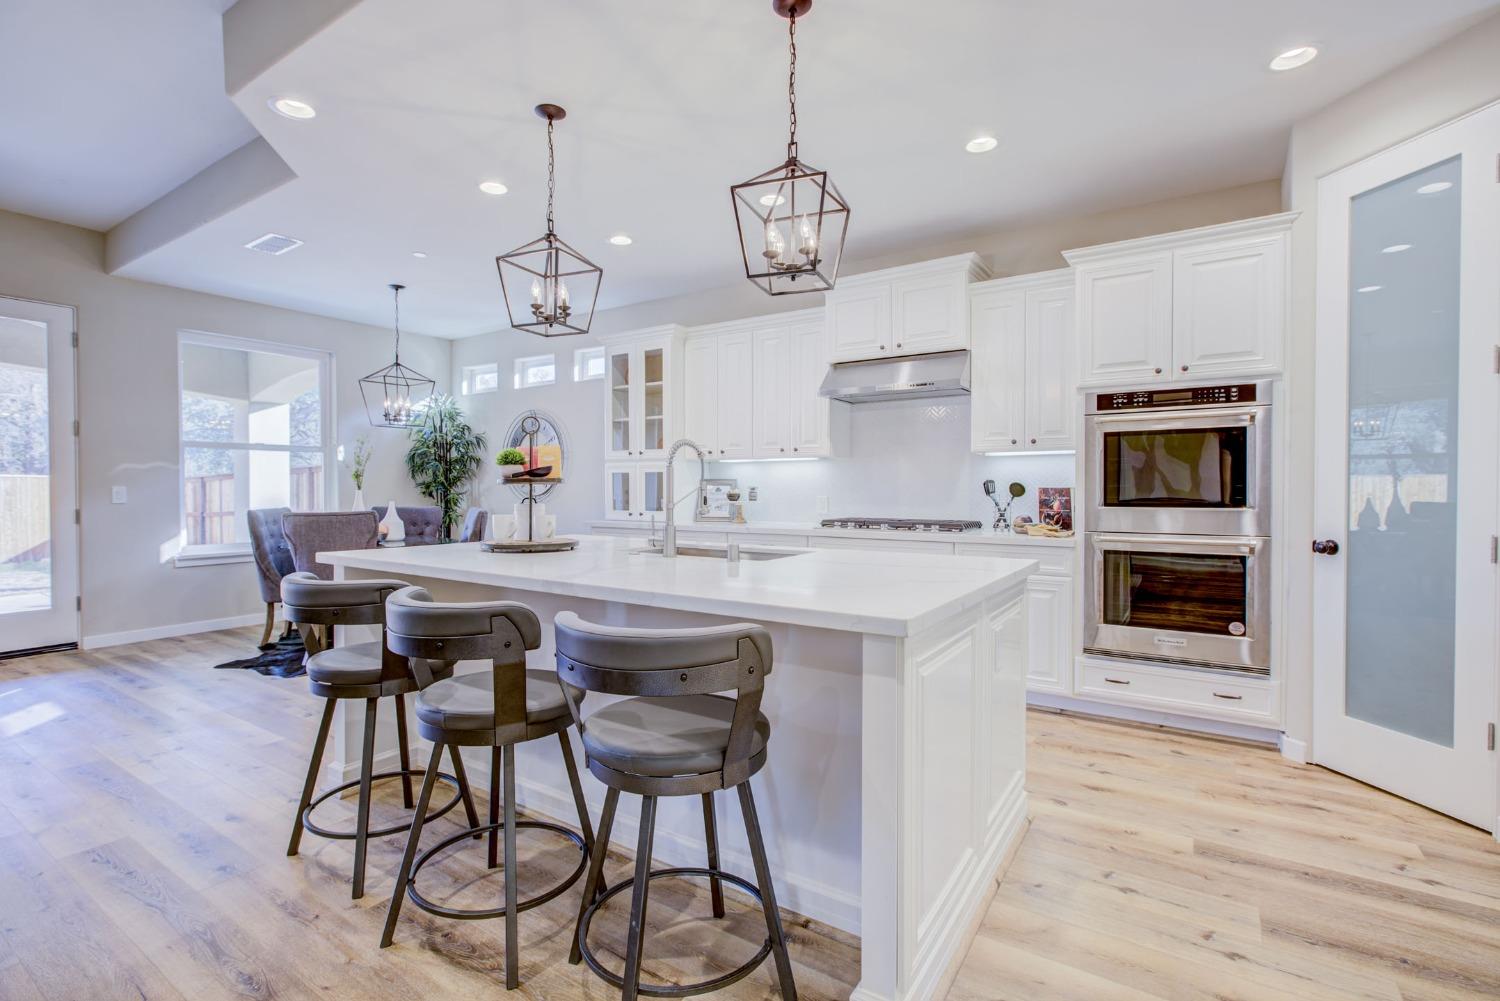 a kitchen with stainless steel appliances kitchen island a large island in the center cabinets and wooden floor